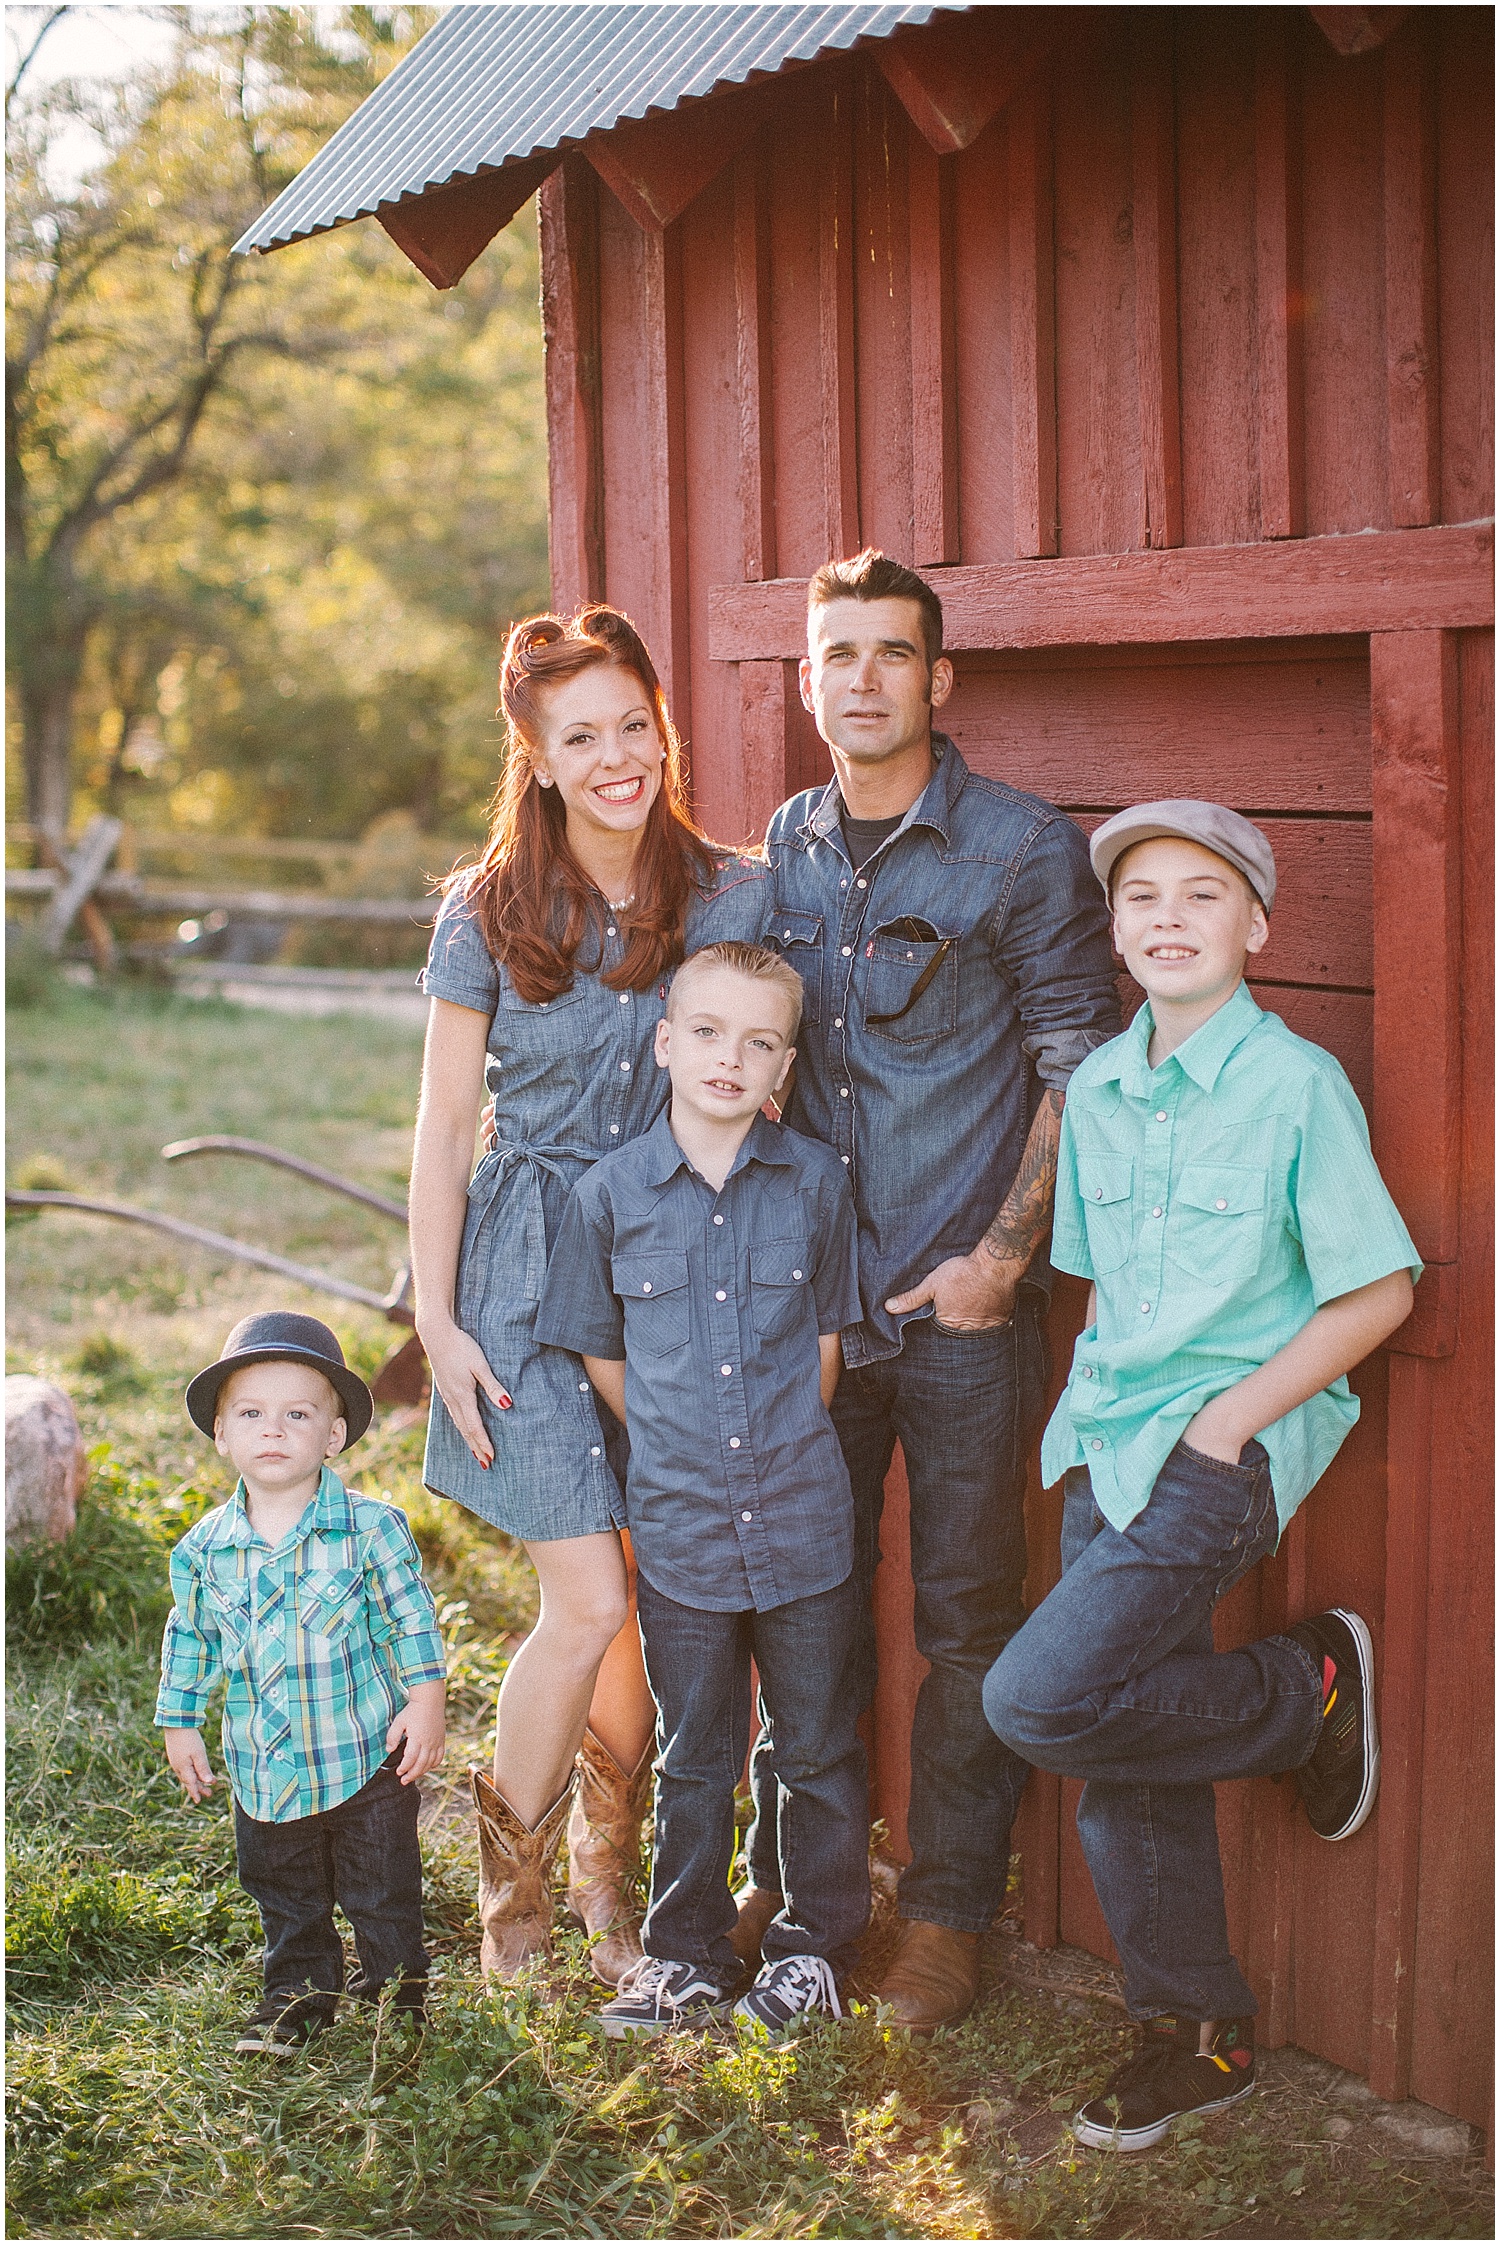 The McCay Family – Golden Family Photography